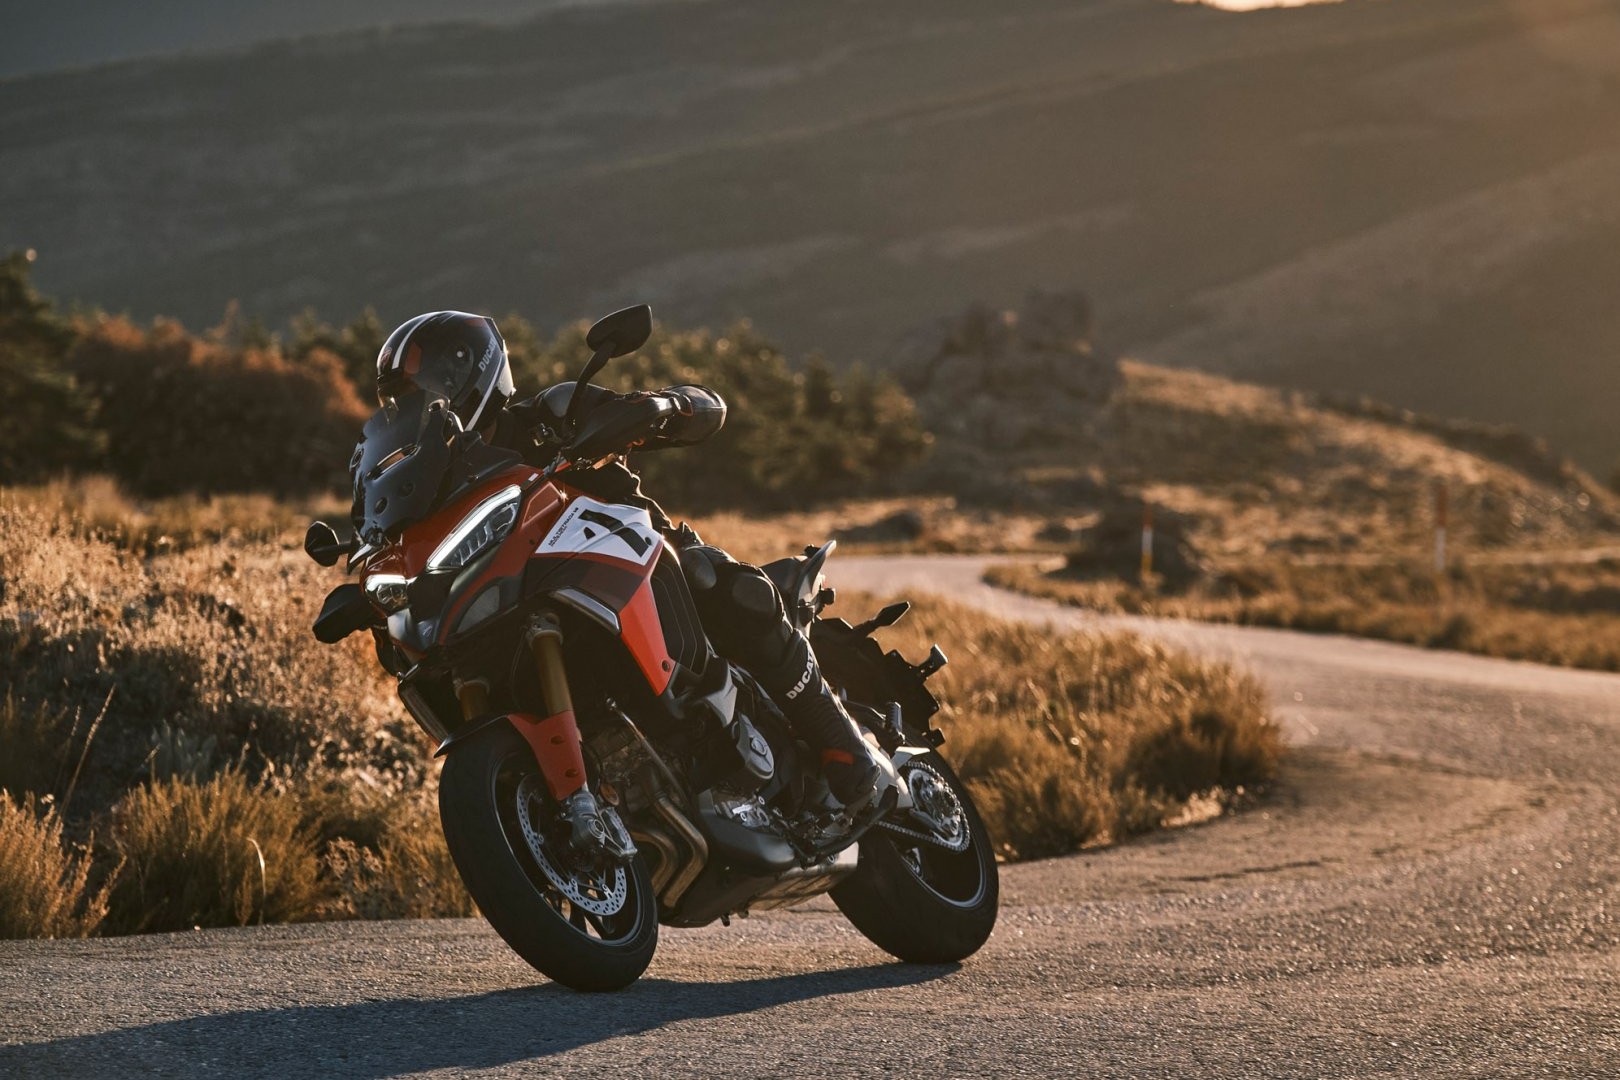 Ducati Multistrada V4 Pikes Peak launched in India - Motoring World